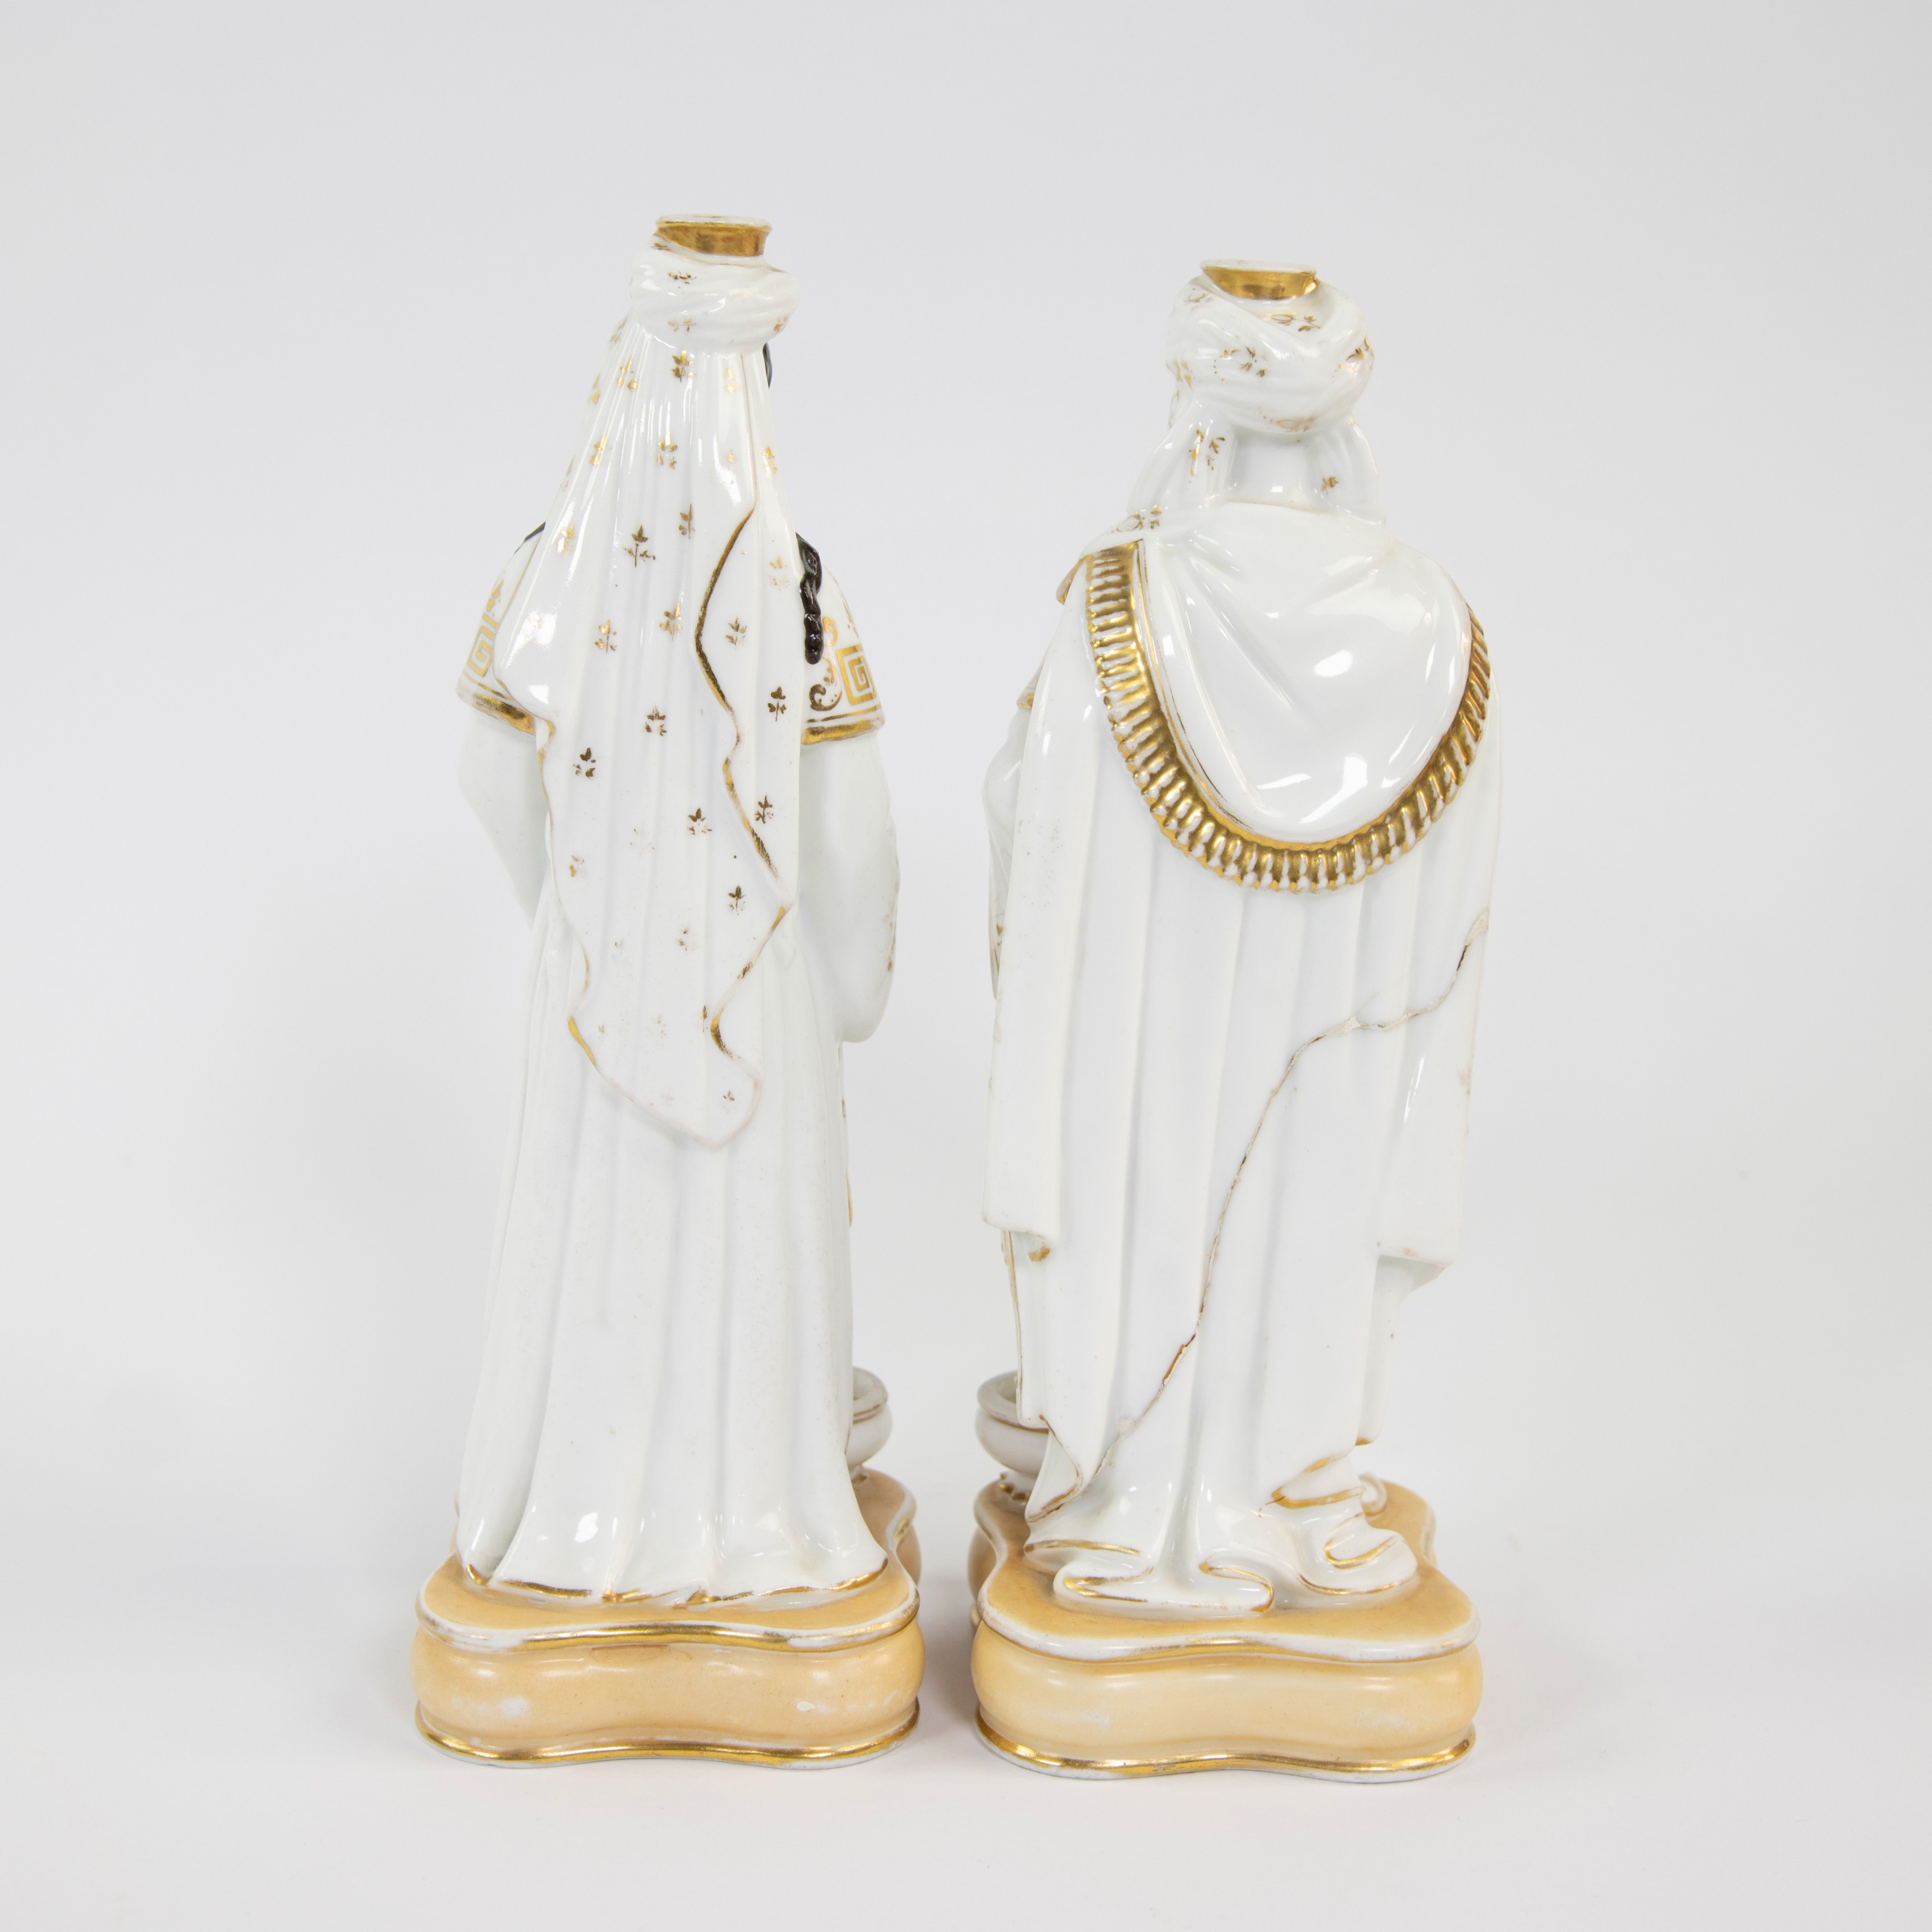 JACOB-PETIT (1796-1868), perfume bottles in the form of a Sultan and Sultana, marked j.p. - Image 3 of 6